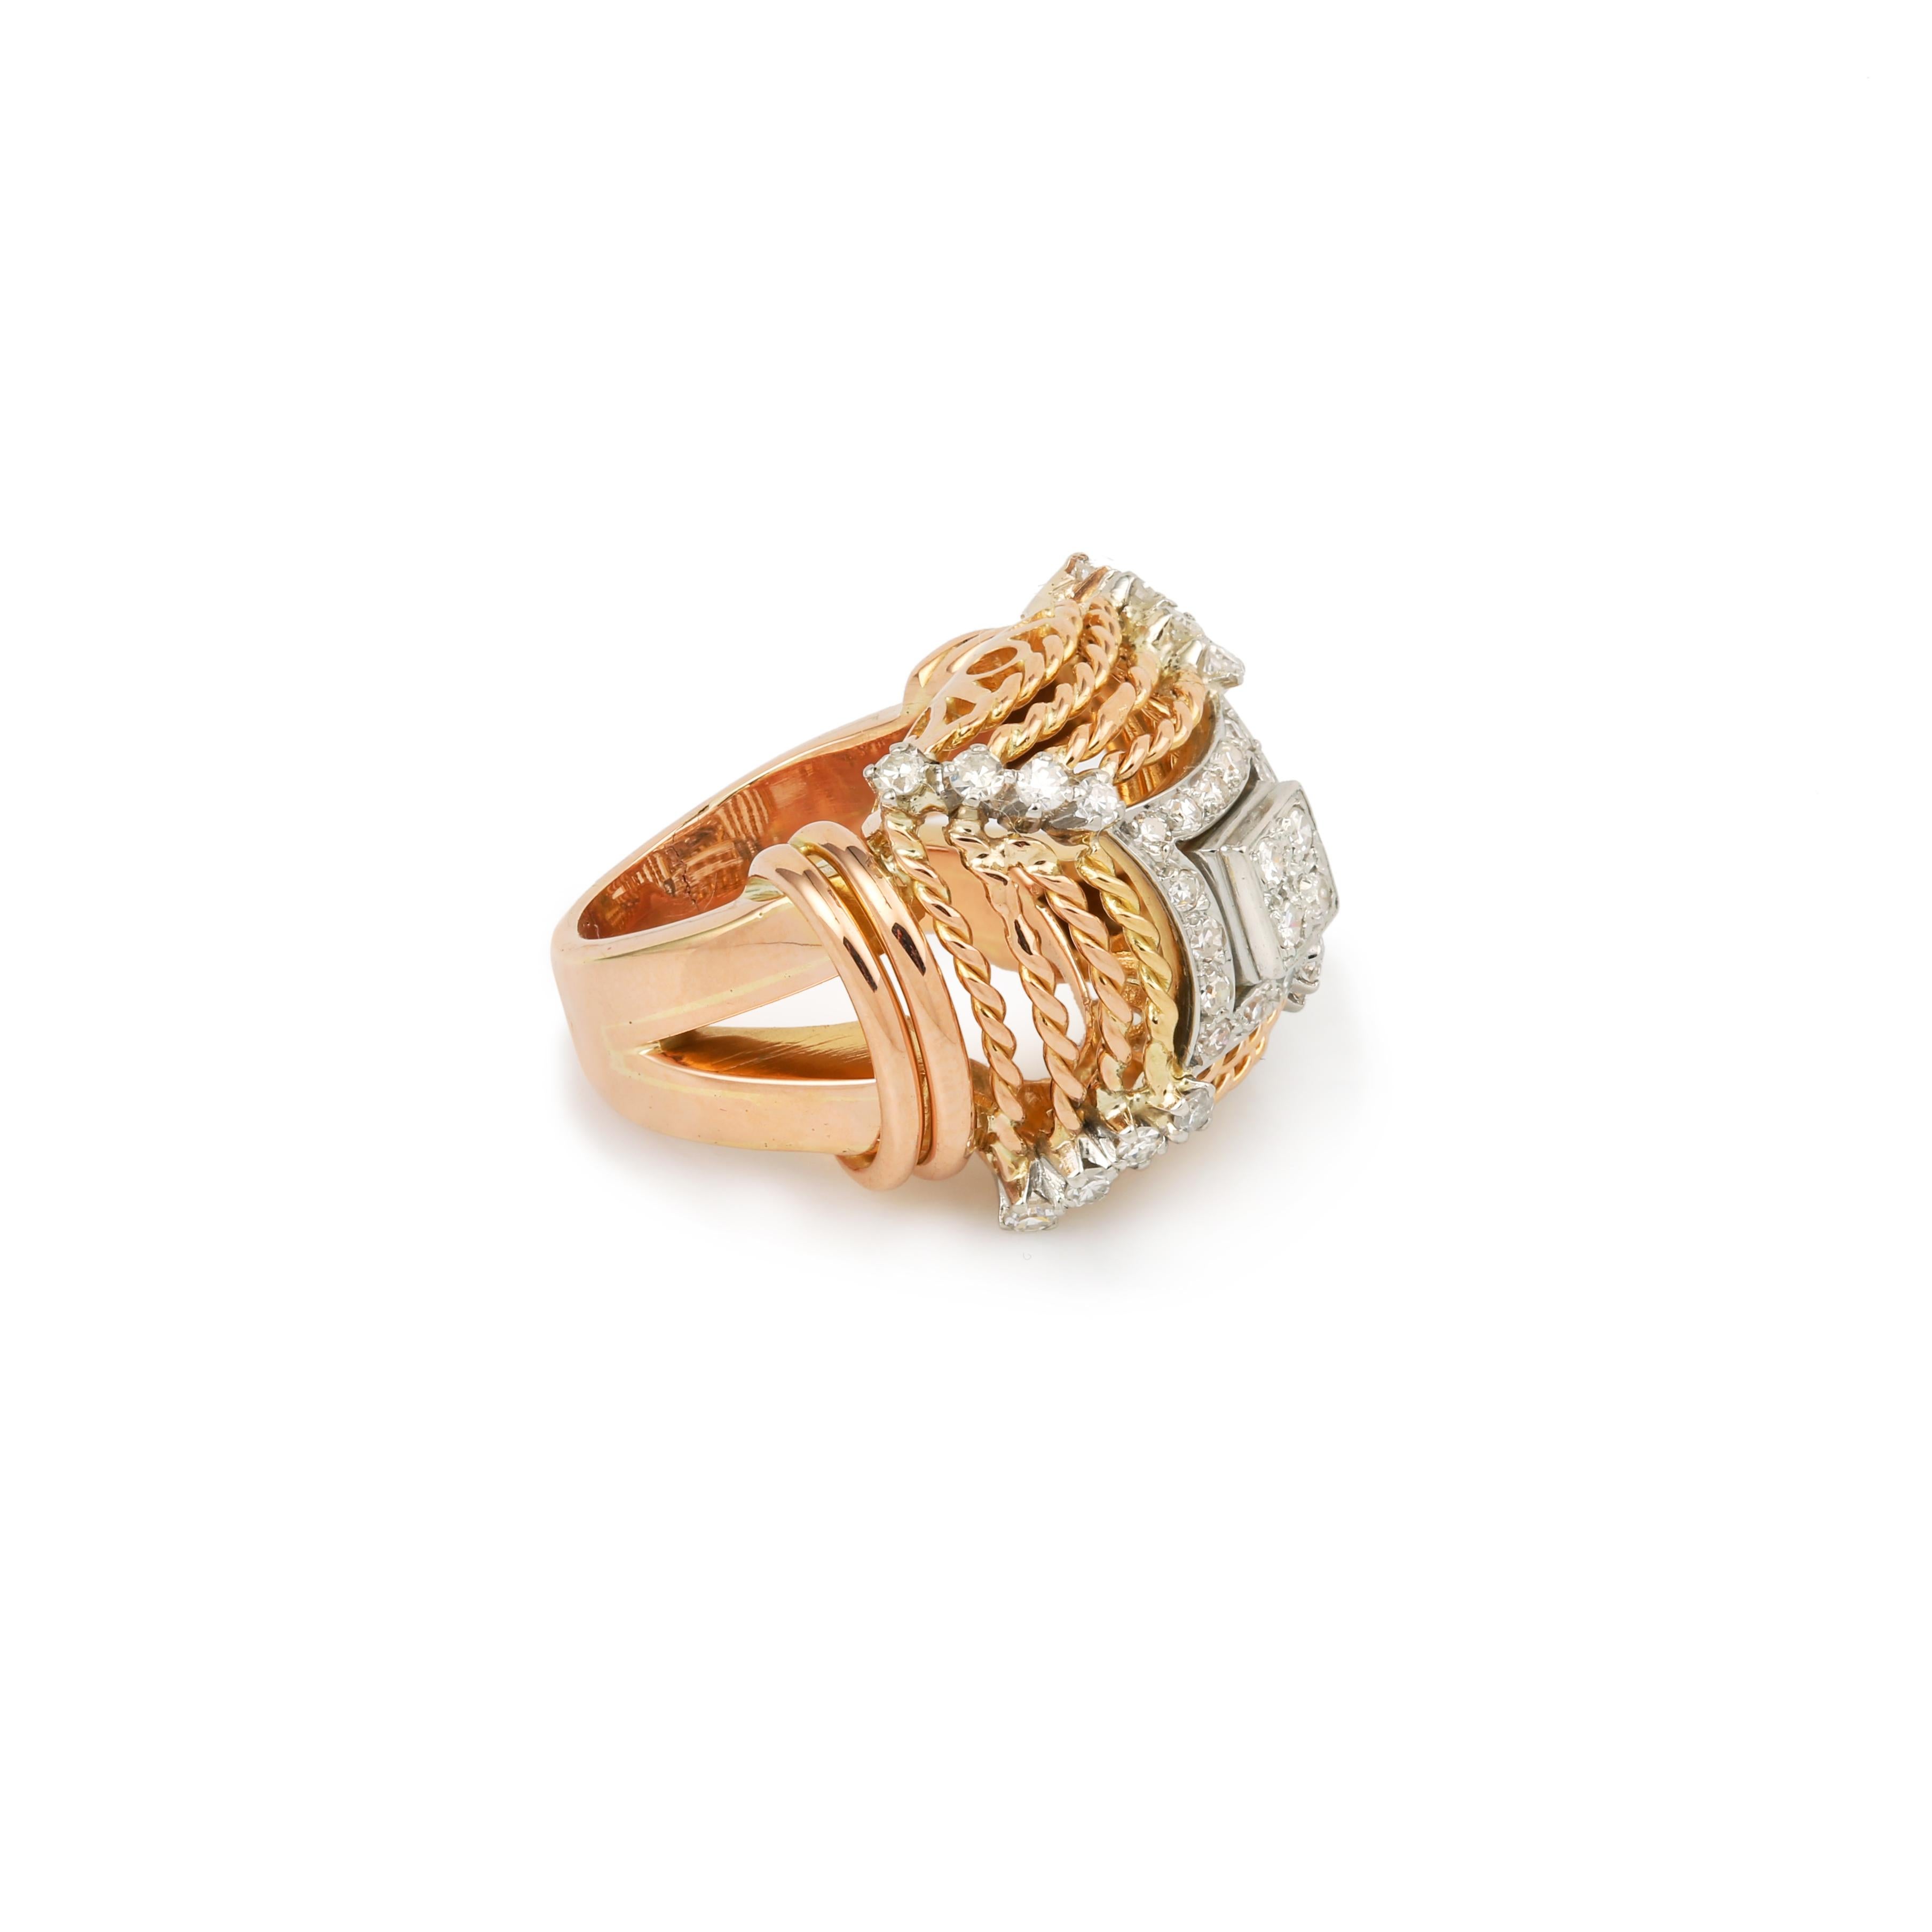 Imposing pink gold ring with a twisted motif, gadrooned shoulders and pavé diamonds.

Estimated total diamond weight: 0.70 carats

Dimensions: 18.25 x 23.97 x 10.96 mm (0.718 x 0.944 x 0.427 inch)

Finger size: 52 (US: 6)

Ring weight: 12.6